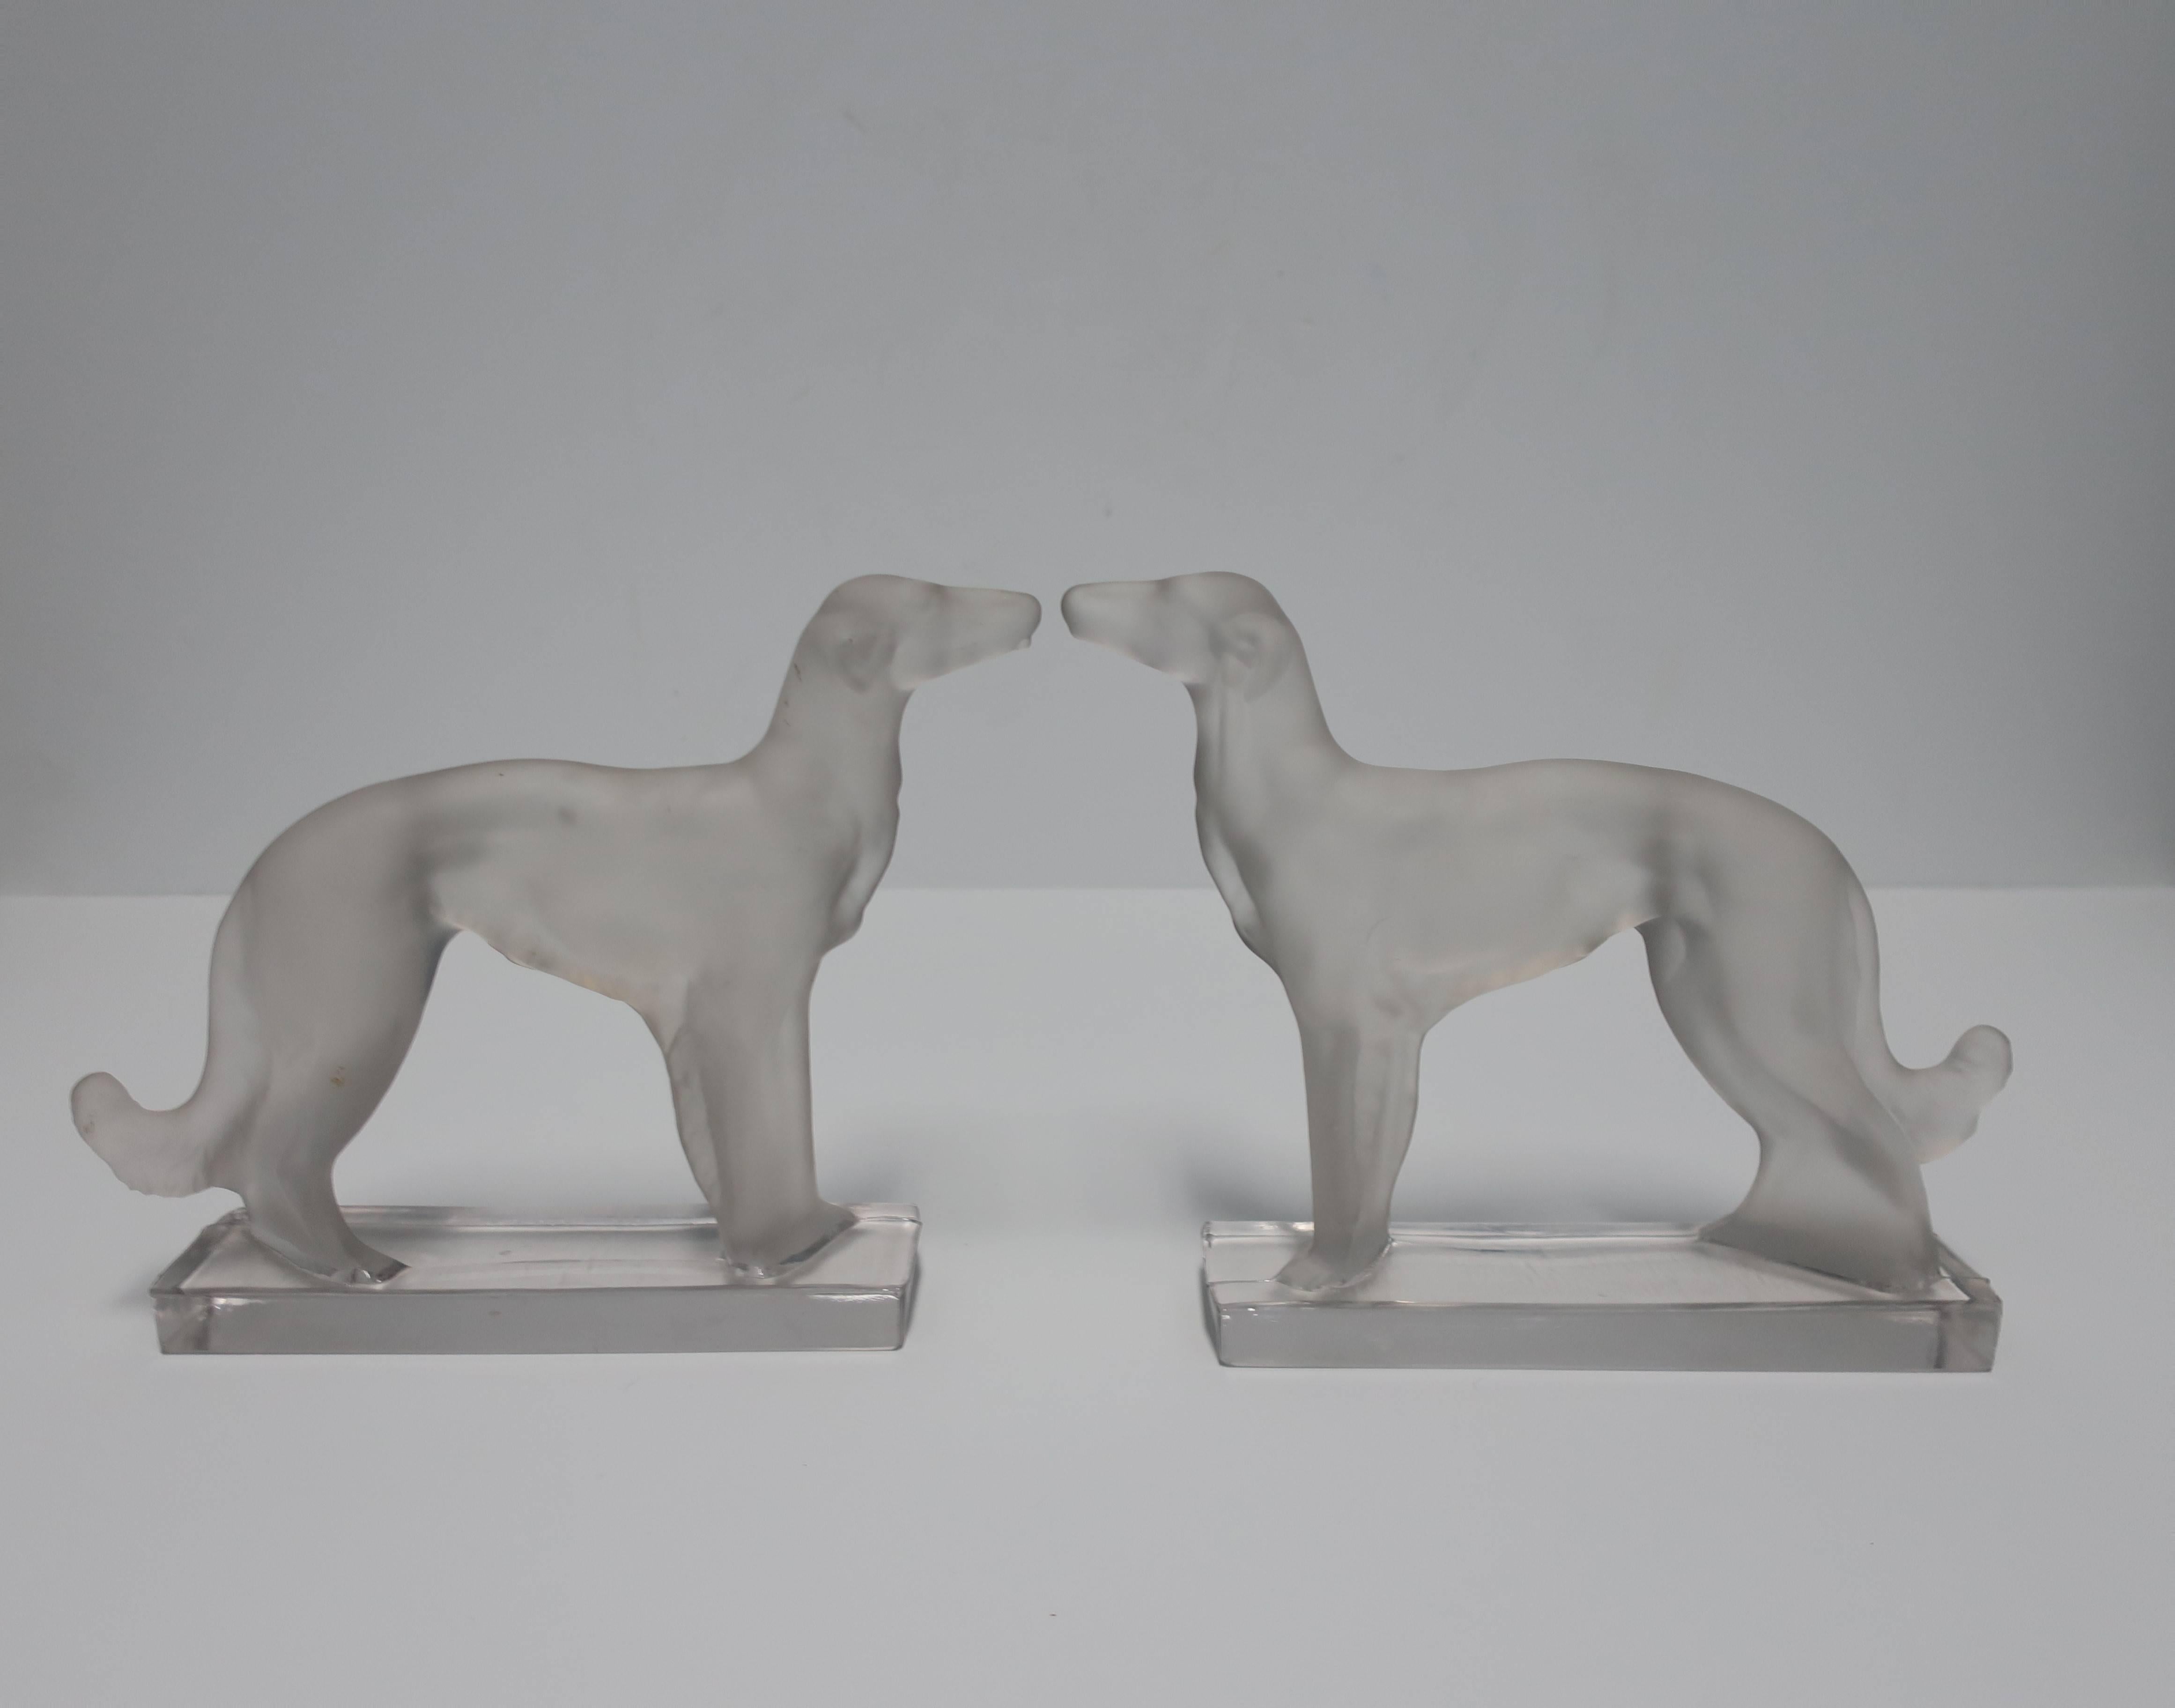 A beautiful pair of Art Deco 'Borzoi' Wolfhound dog crystal bookends or sculpture pieces, circa 1930s - 1940s. Dimensions: 8